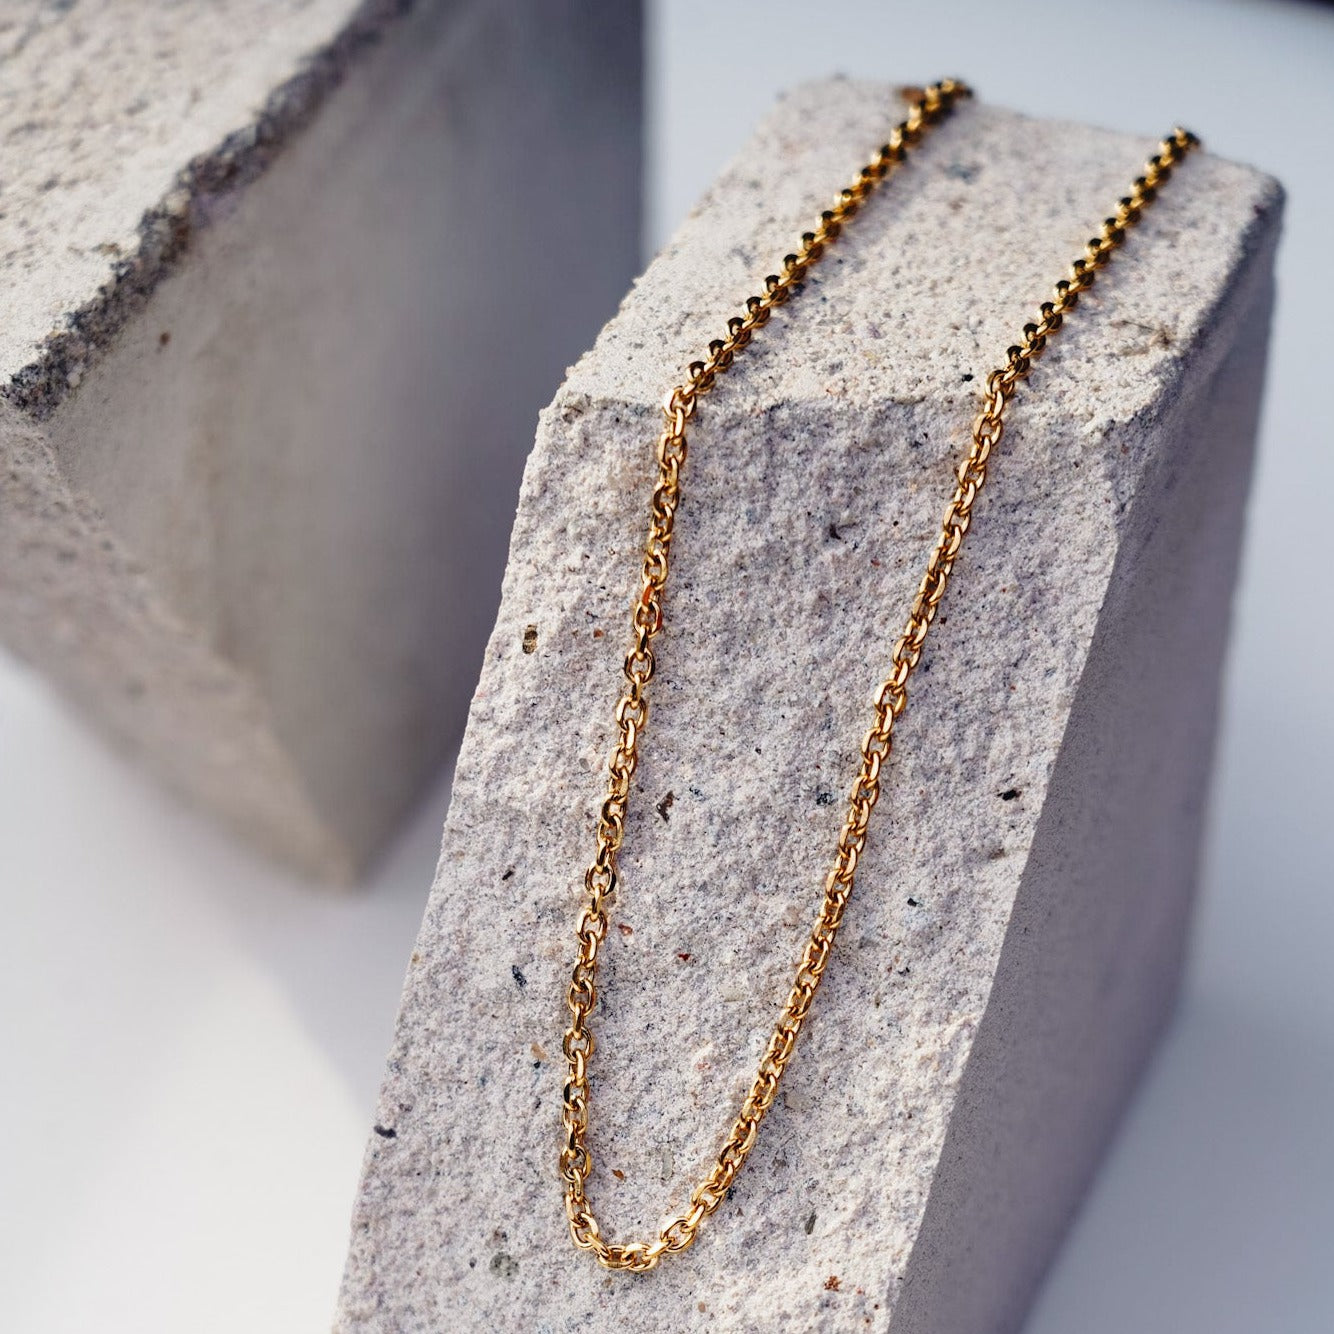 NL Cable necklace - Gold-toned